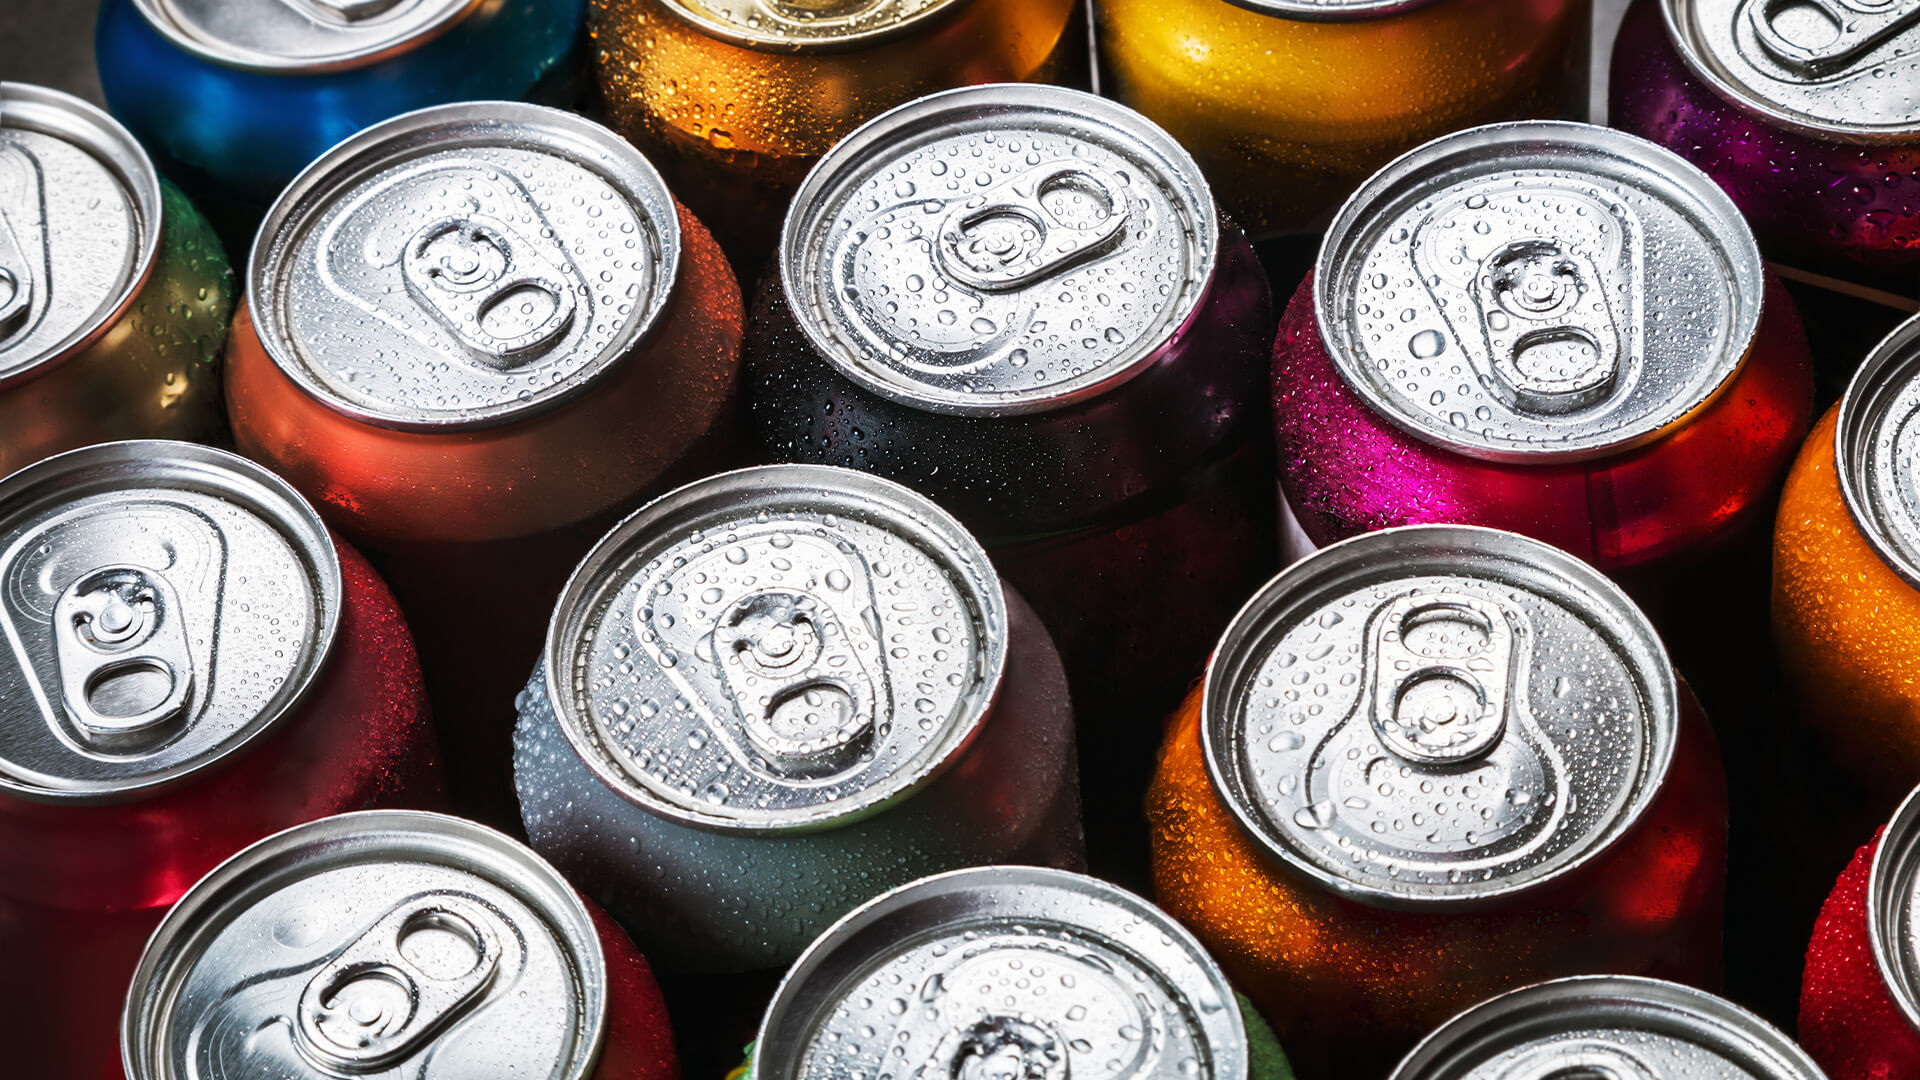 aluminum cans of soda background. the view from the top